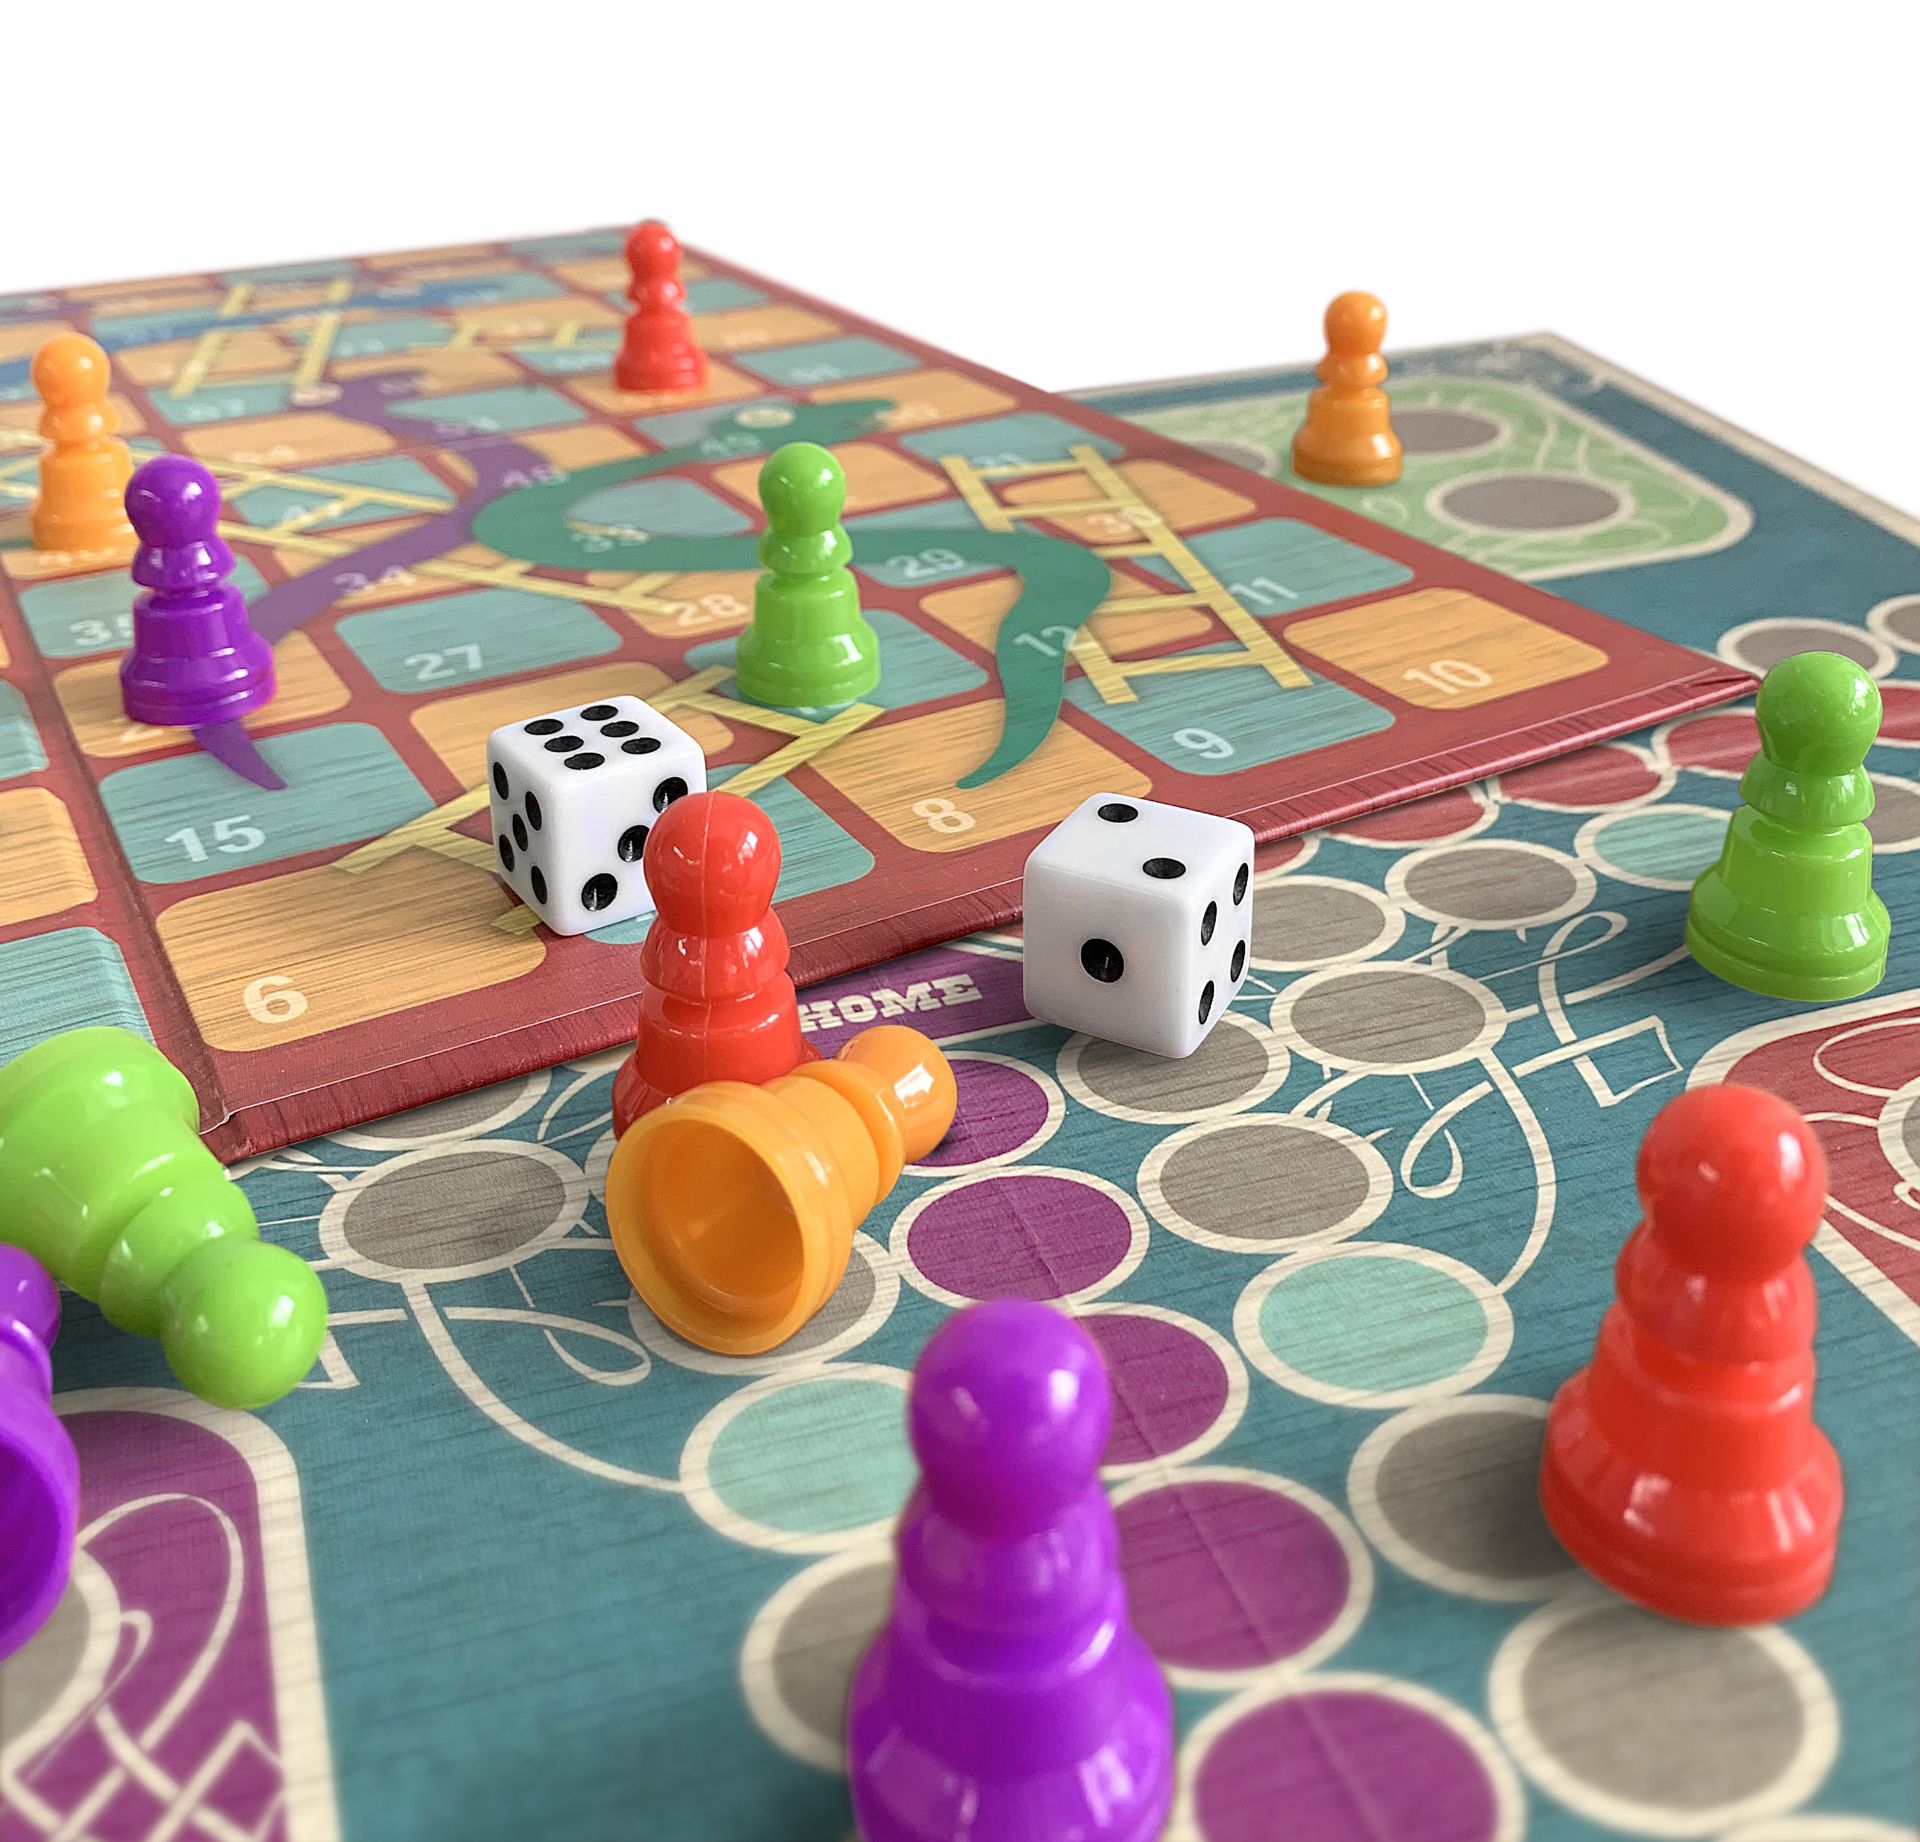 New 2 in 1 Games Set - Snakes & Ladders, Ludo - Image 3 of 3